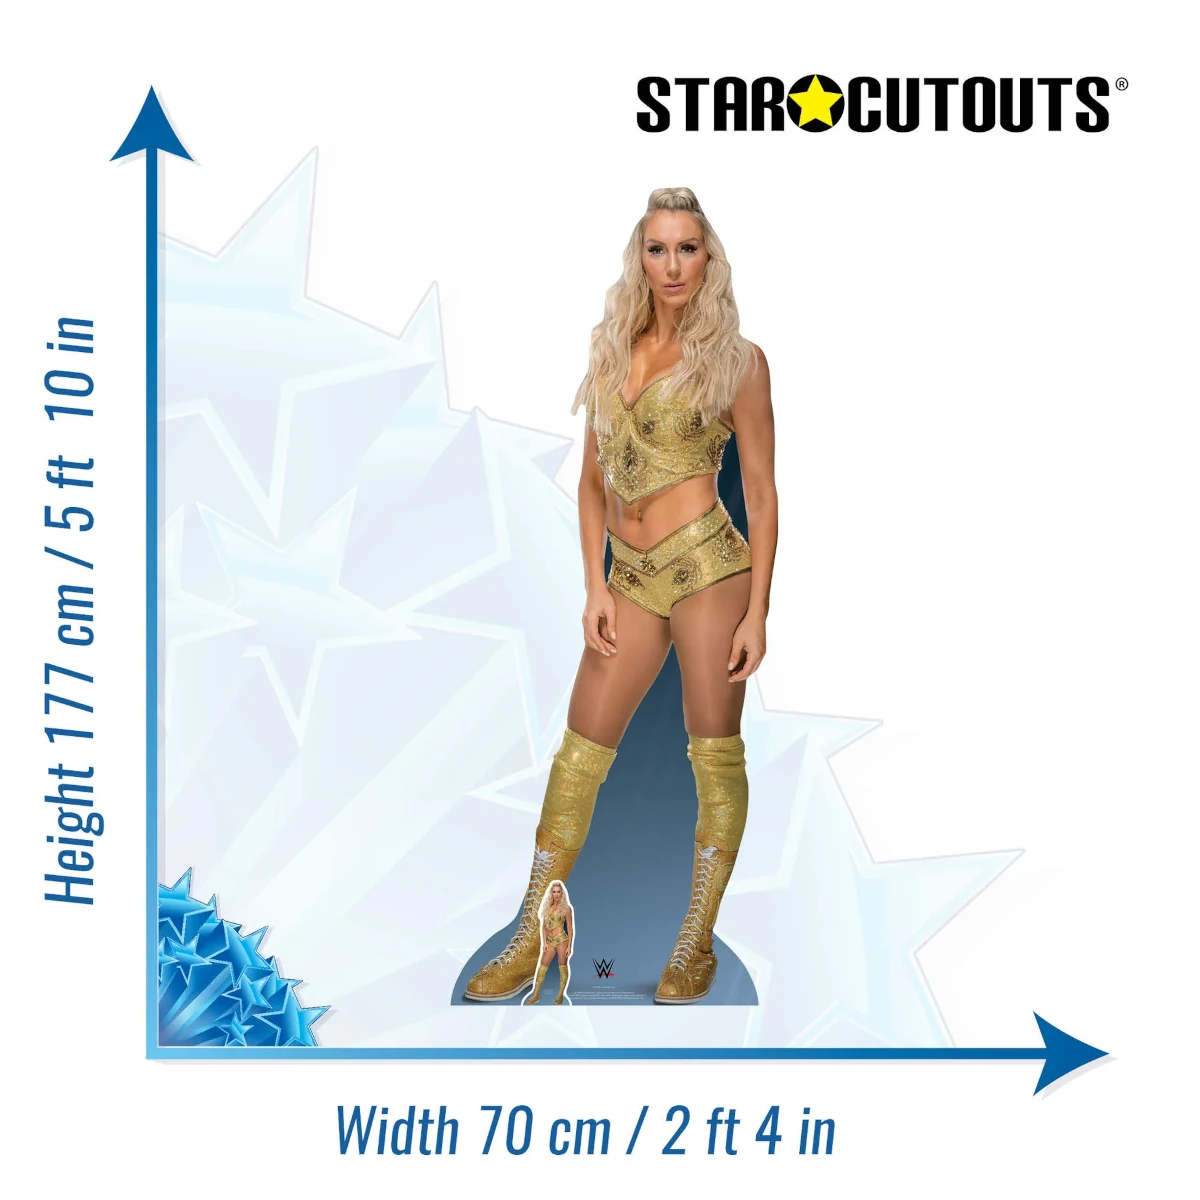 SC1205 Charlotte Flair 'Gold Outfit' (WWE) Official Lifesize + Mini Cardboard Cutout Standee Size